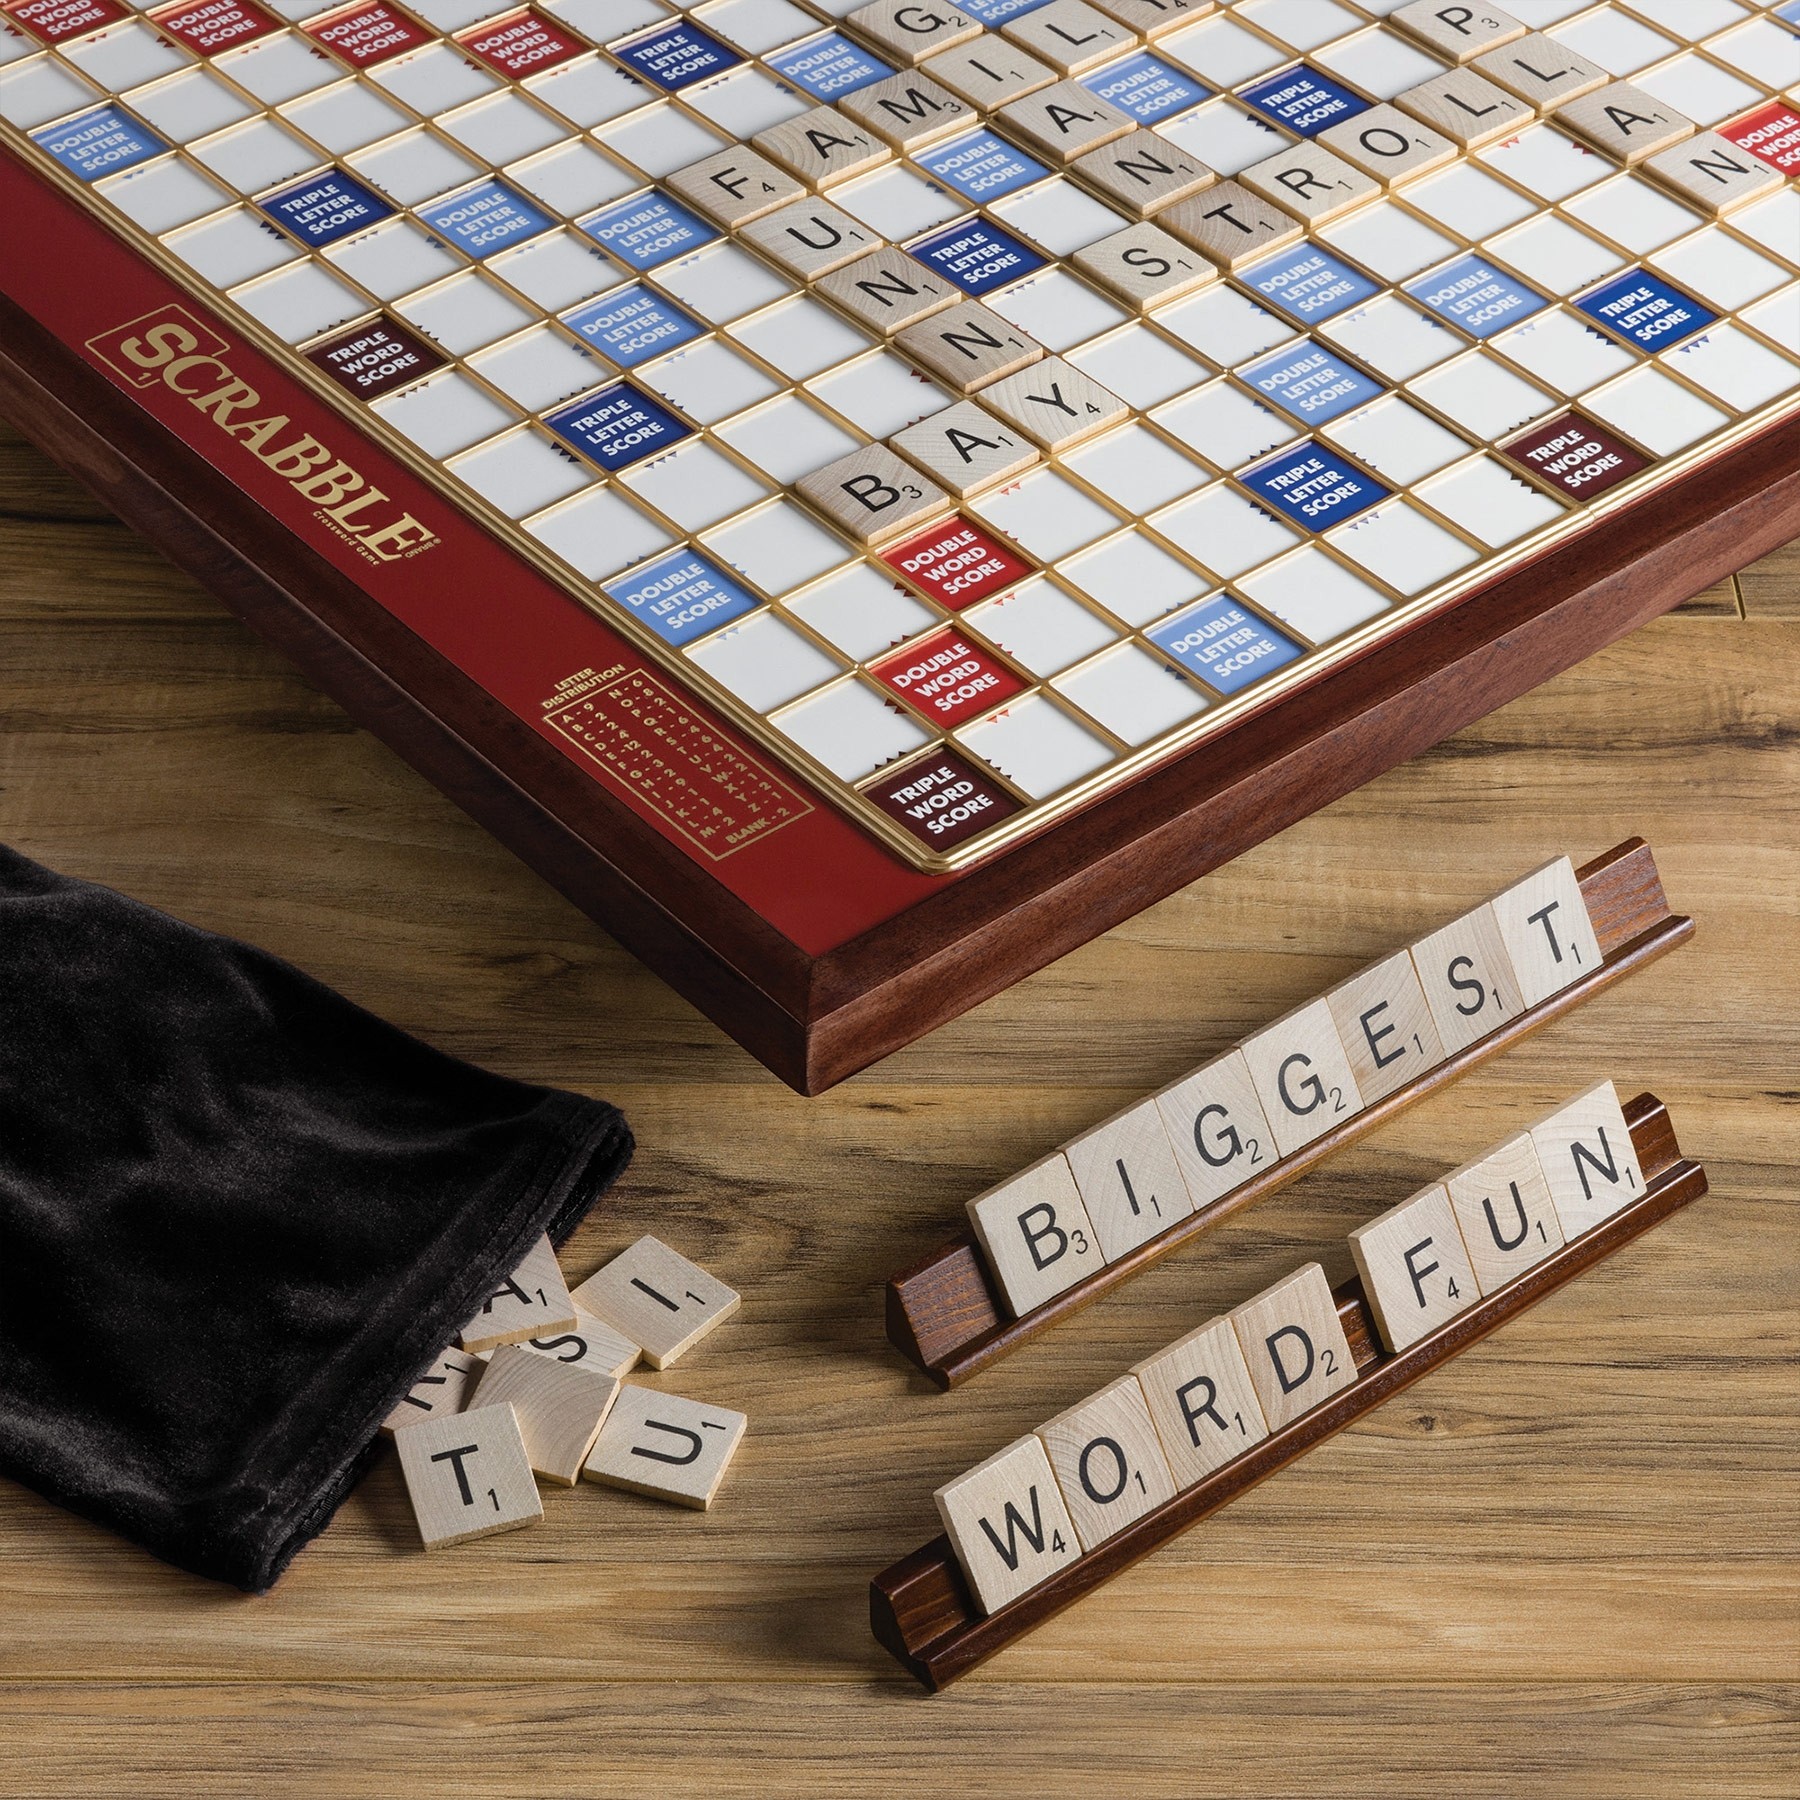 scrabble-deluxe-giant-edition-across-the-board-game-cafe